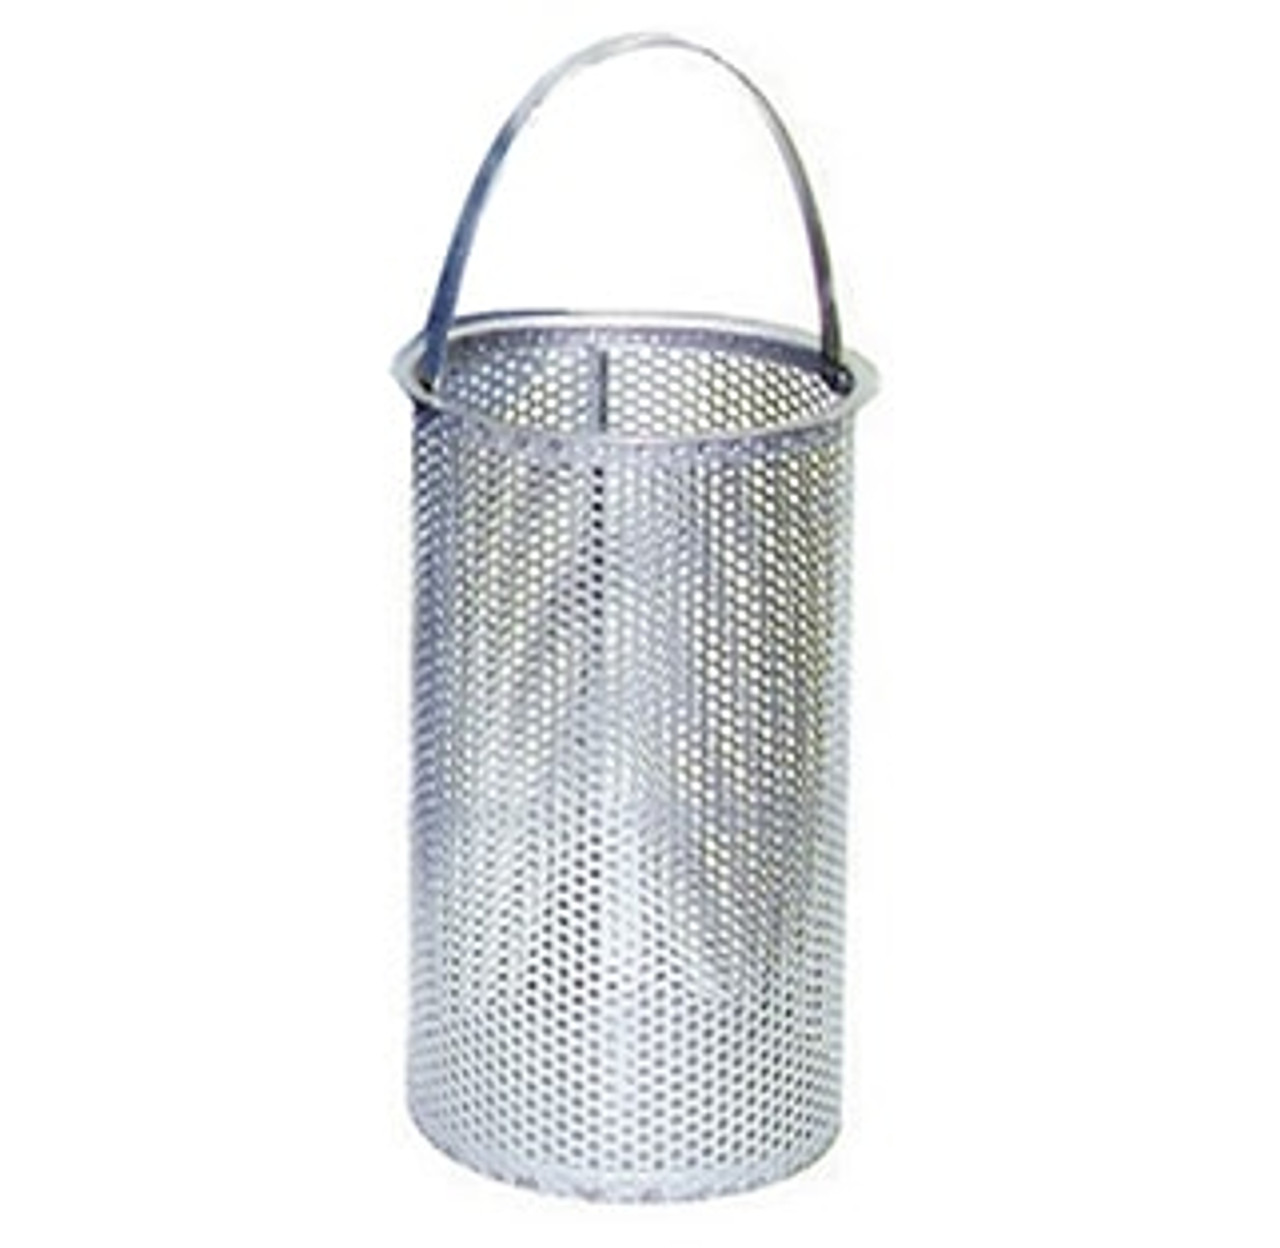 60 Mesh and 5/32" Perforation Replacement Basket for 6" Eaton Model 30R Strainer